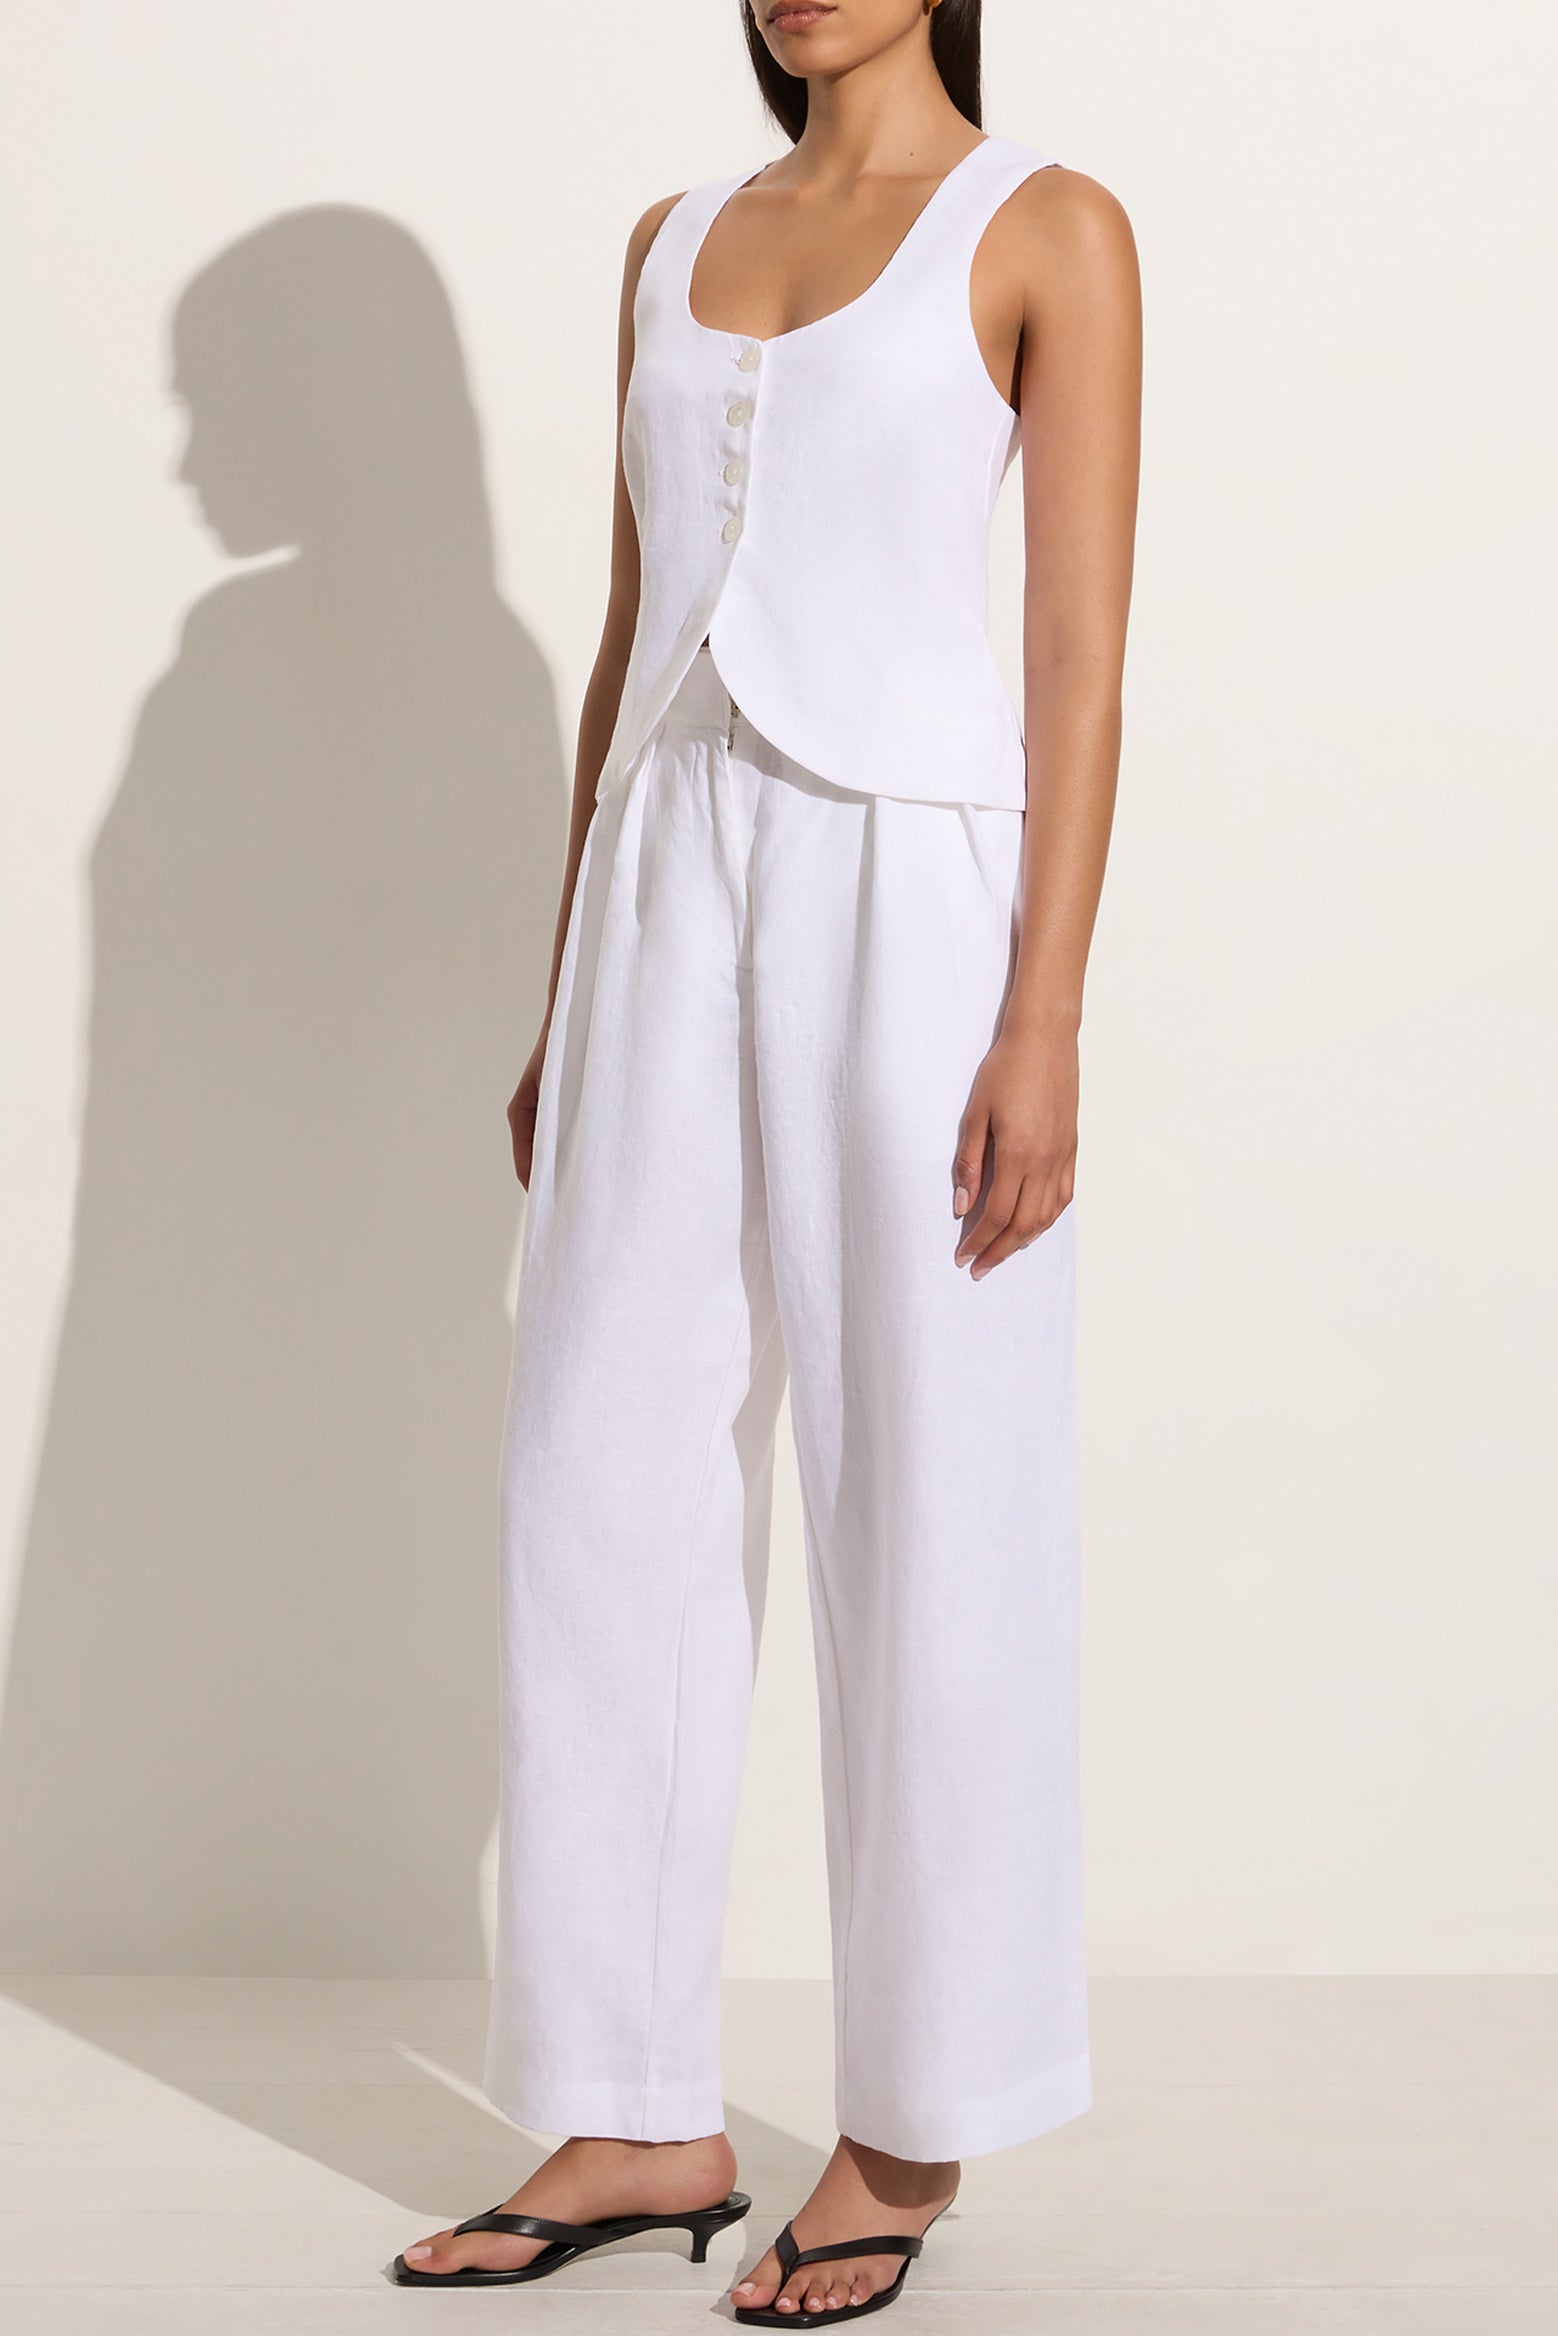 The Faithfull the Brand Duomo Pant in White available at The New Trend Australia